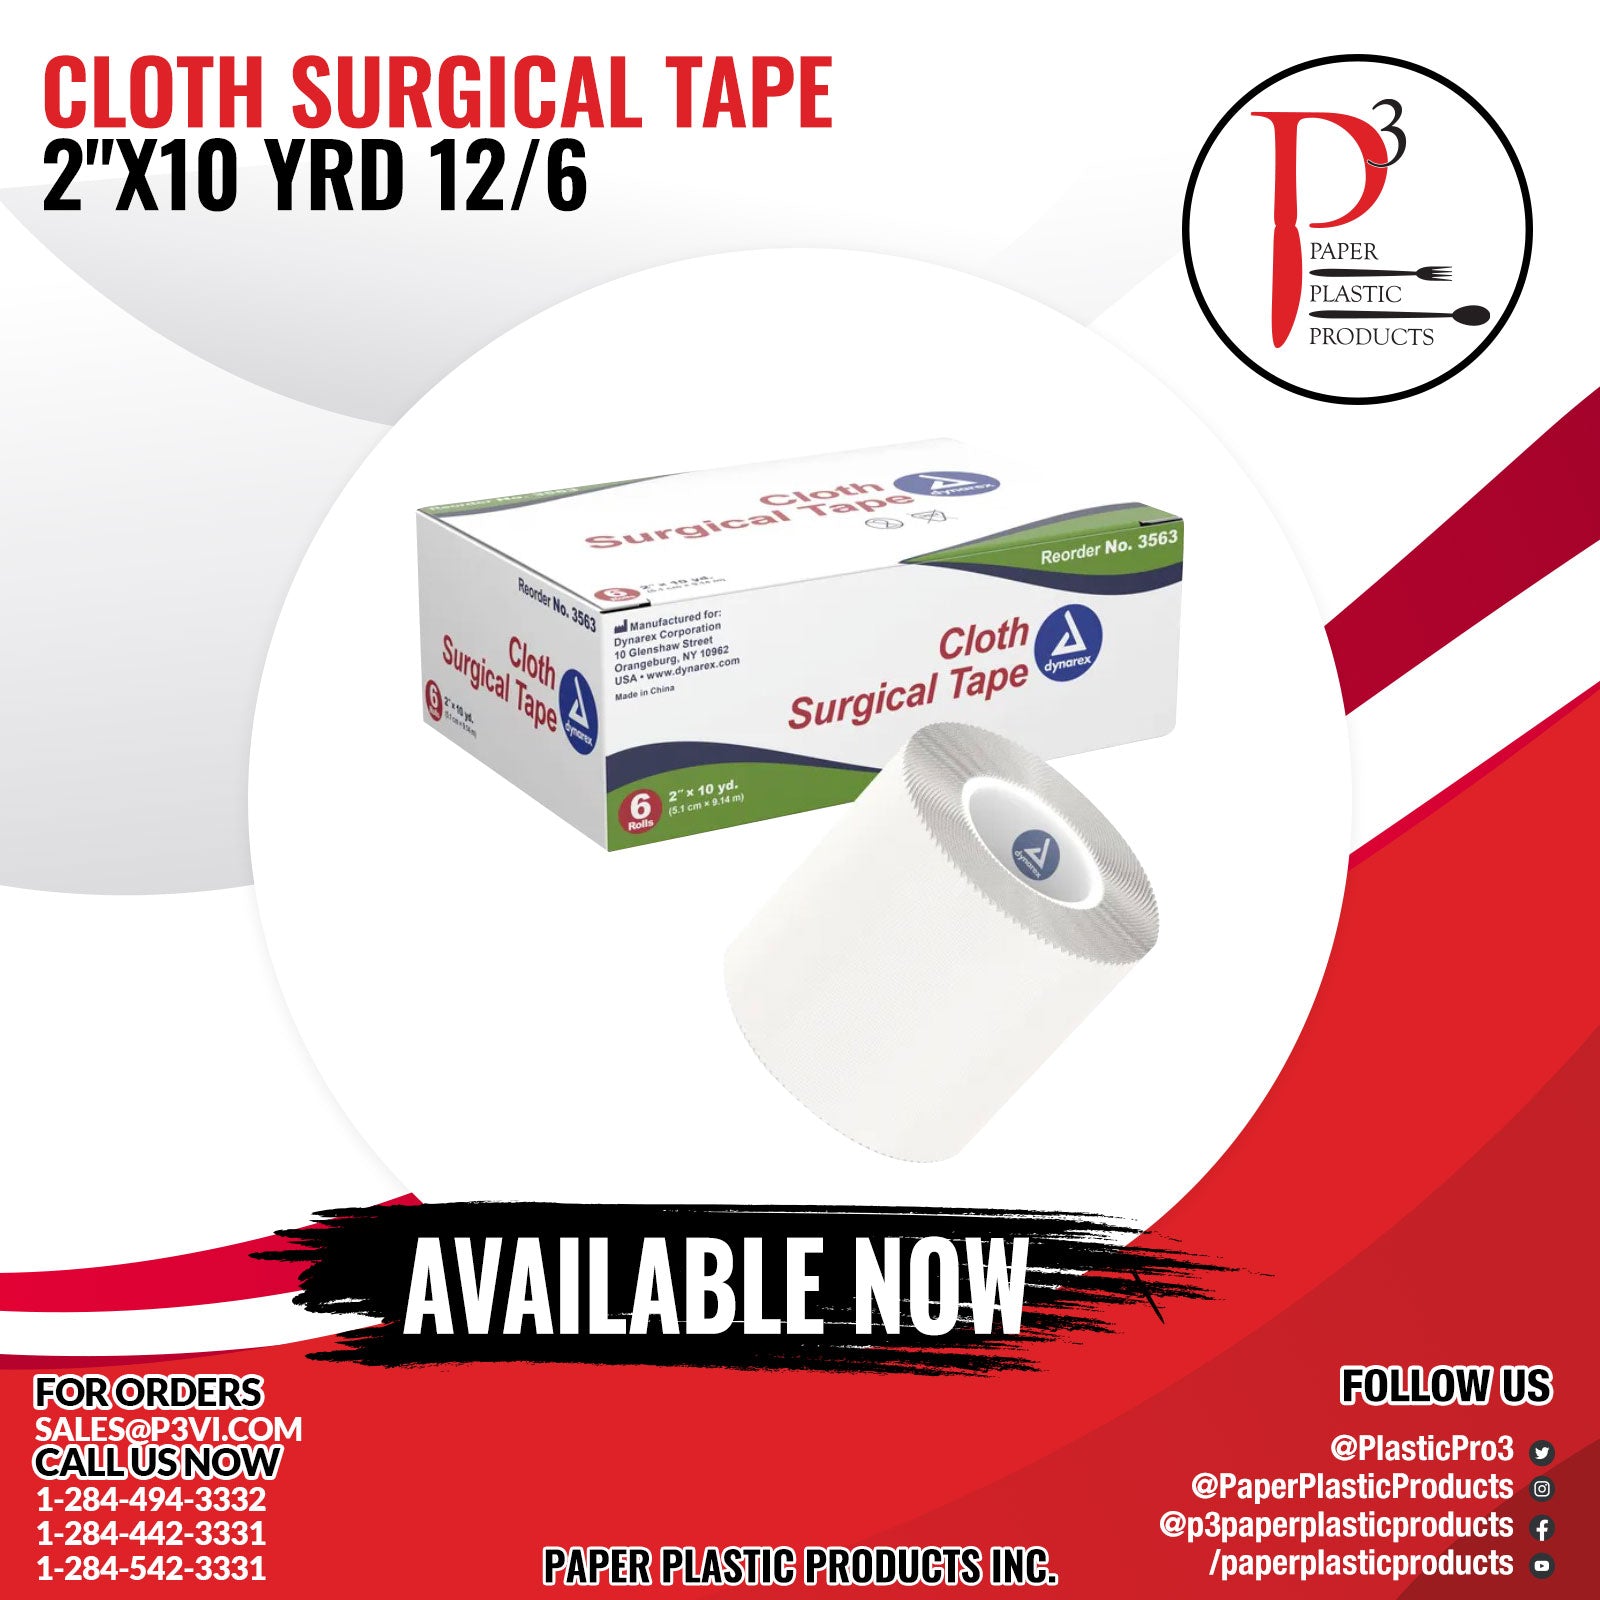 Cloth Surgical Tape 2"x10 yrd 12/6